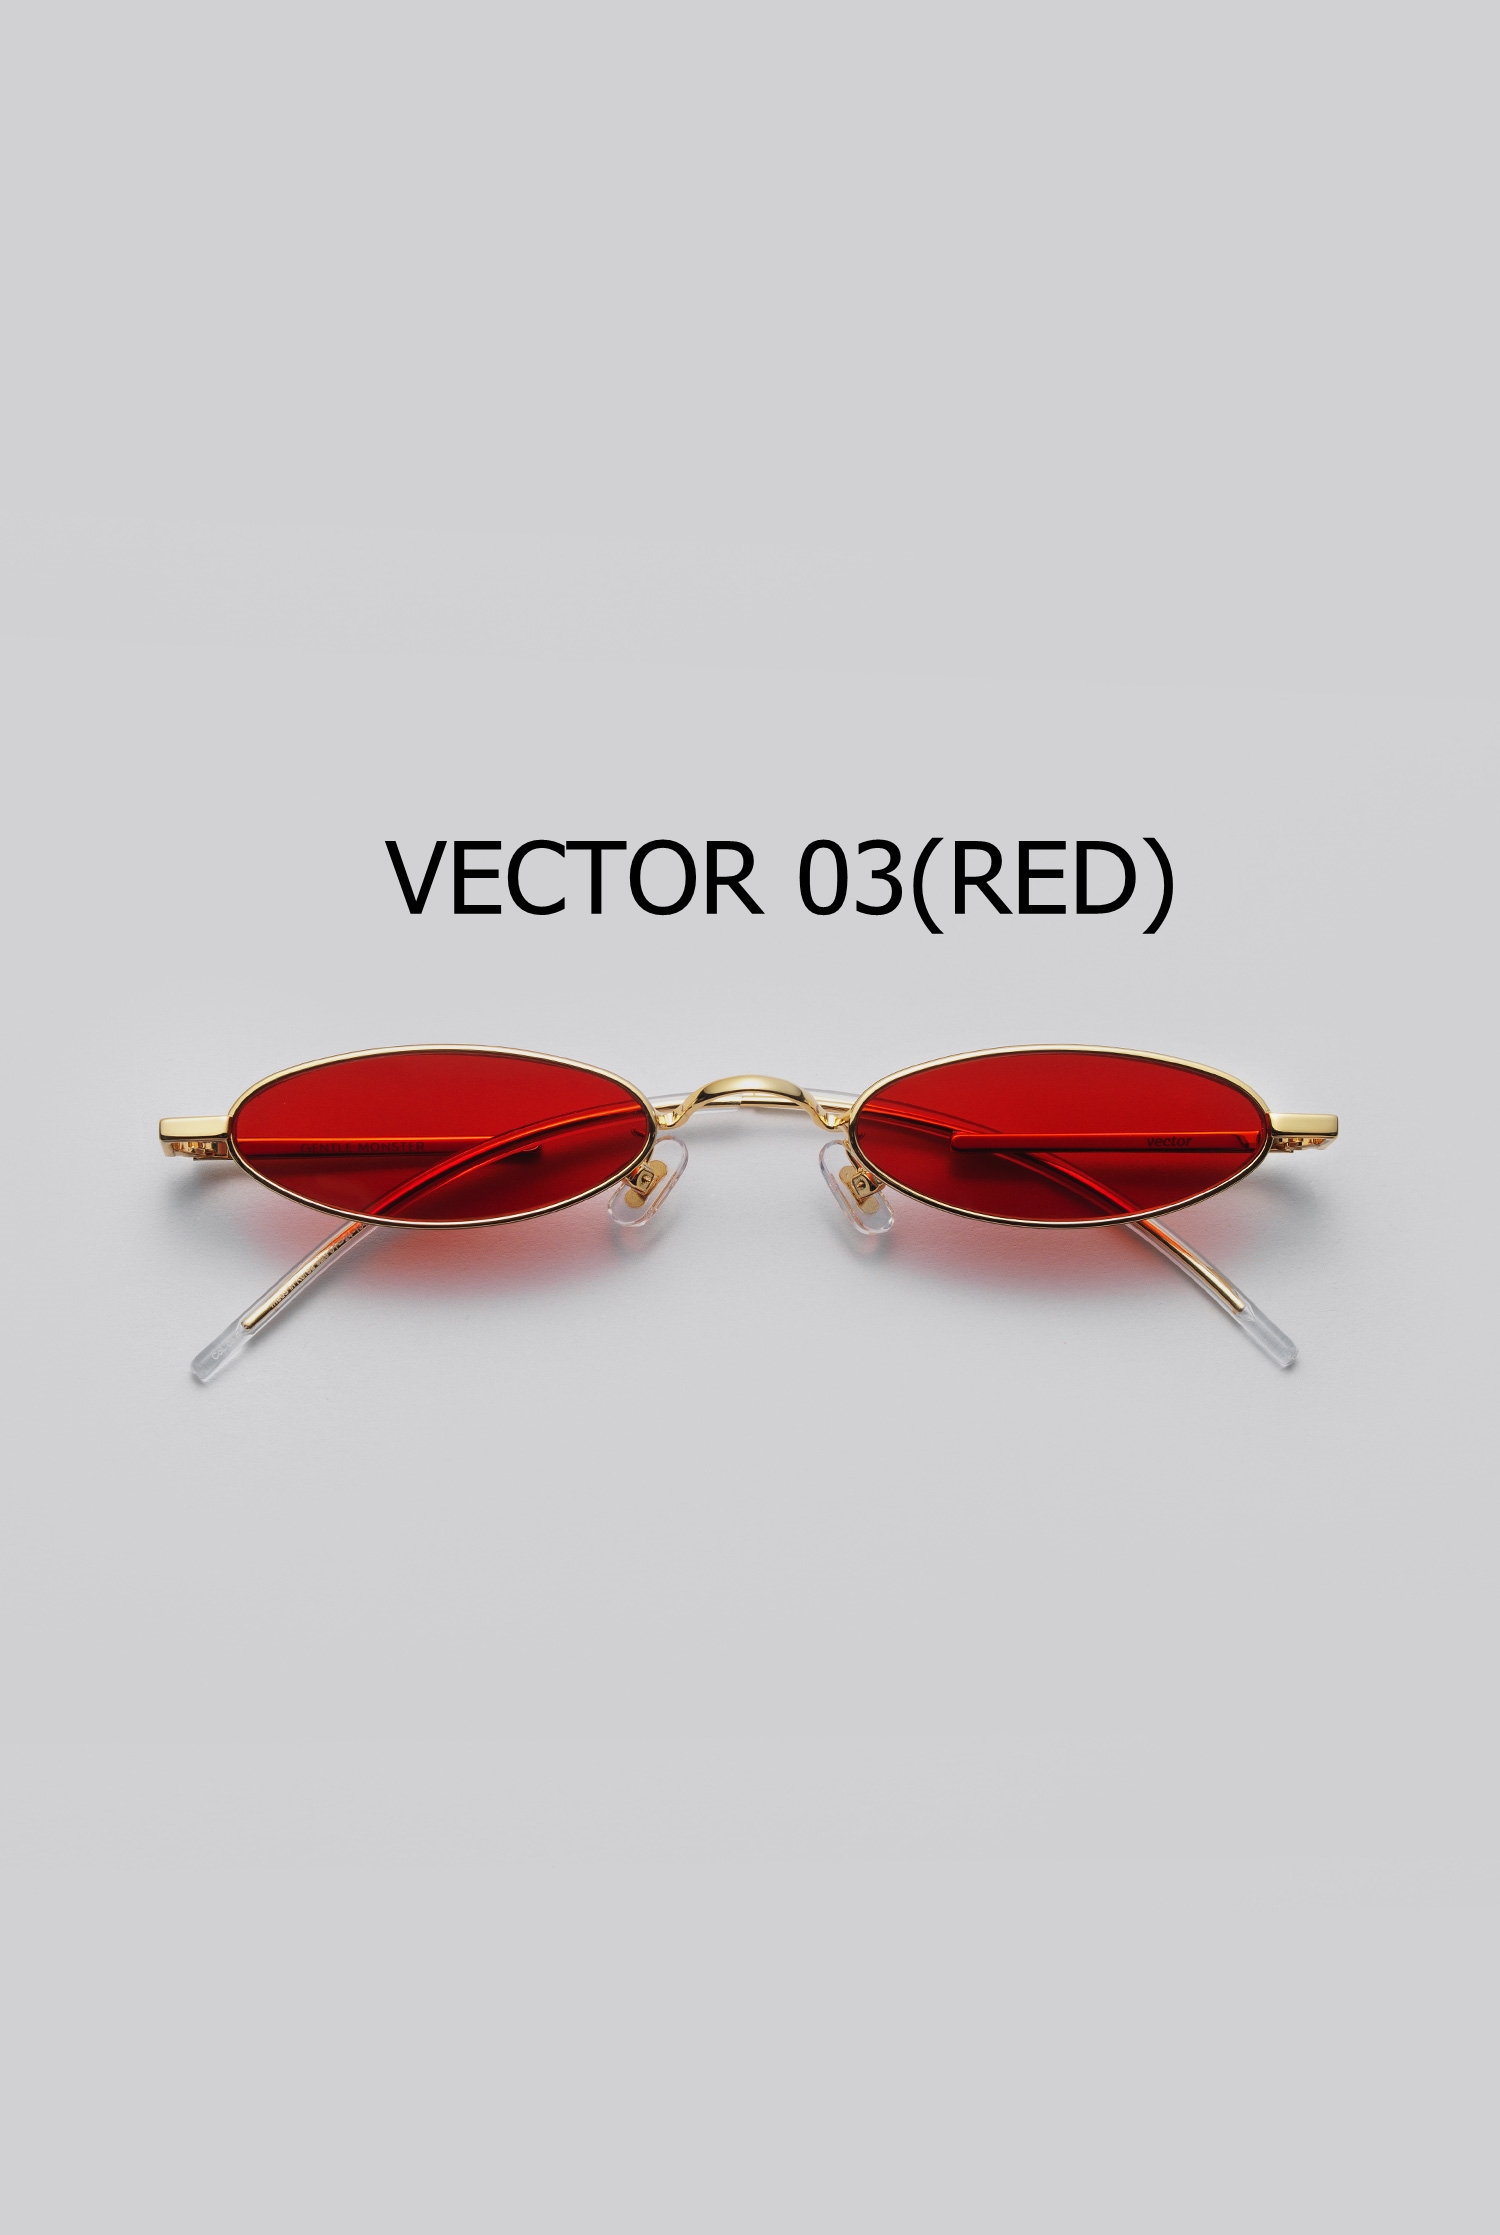 VECTOR 03(RED) 